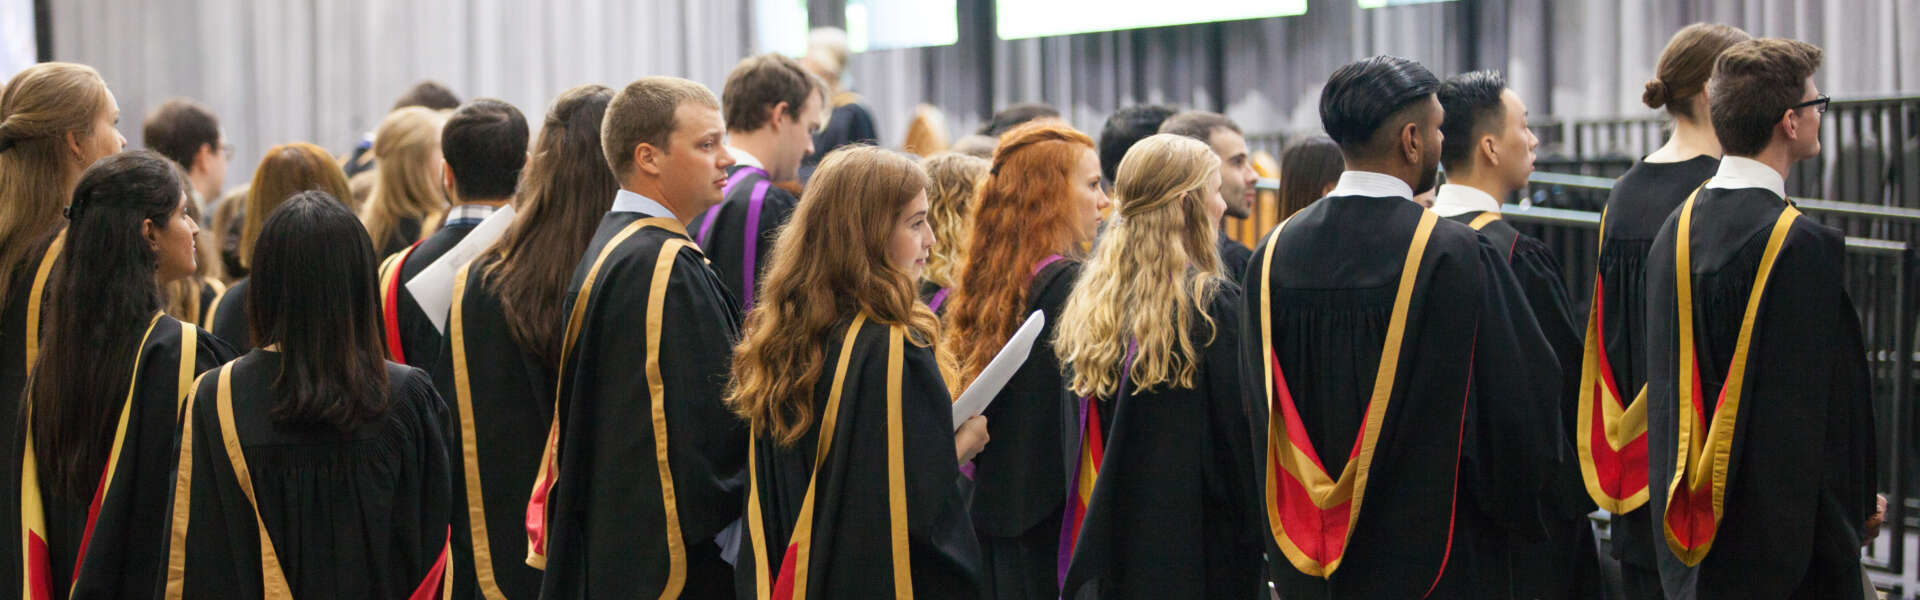 a line of graduands in convocation regalia are shown from behind